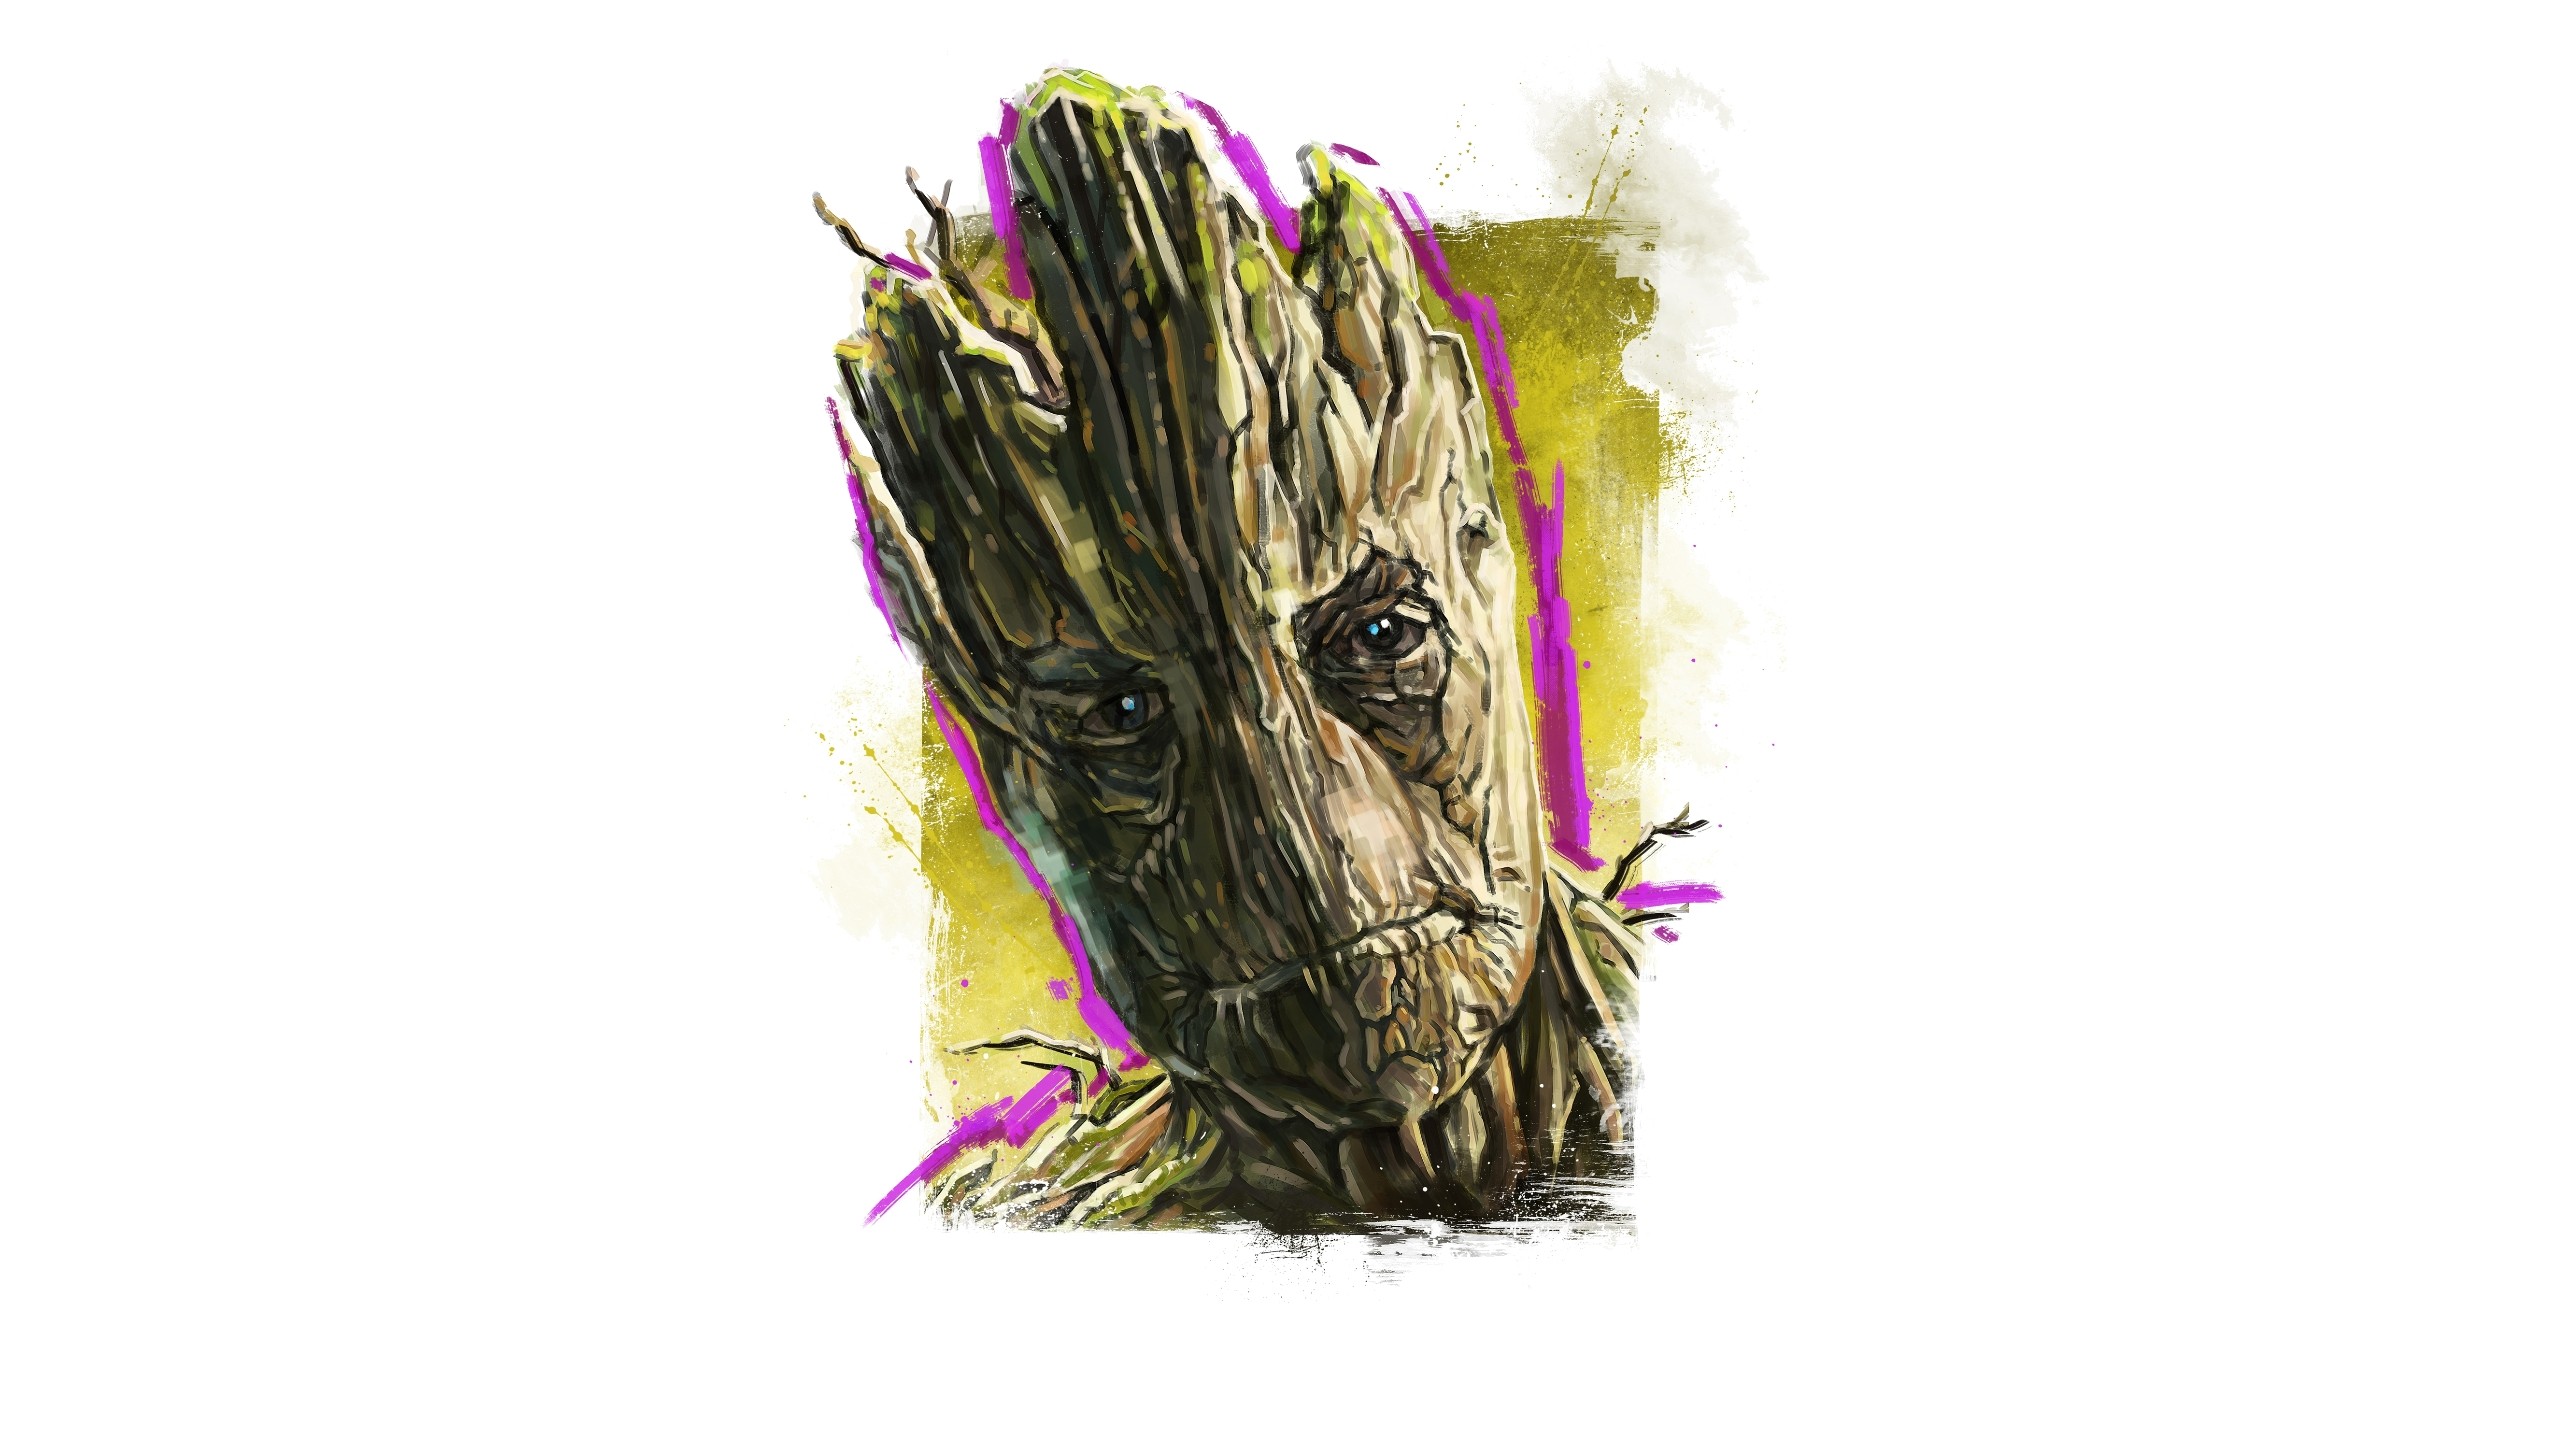 General 2560x1440 Groot Guardians of the Galaxy artwork movies frontal view simple background white background Marvel Cinematic Universe